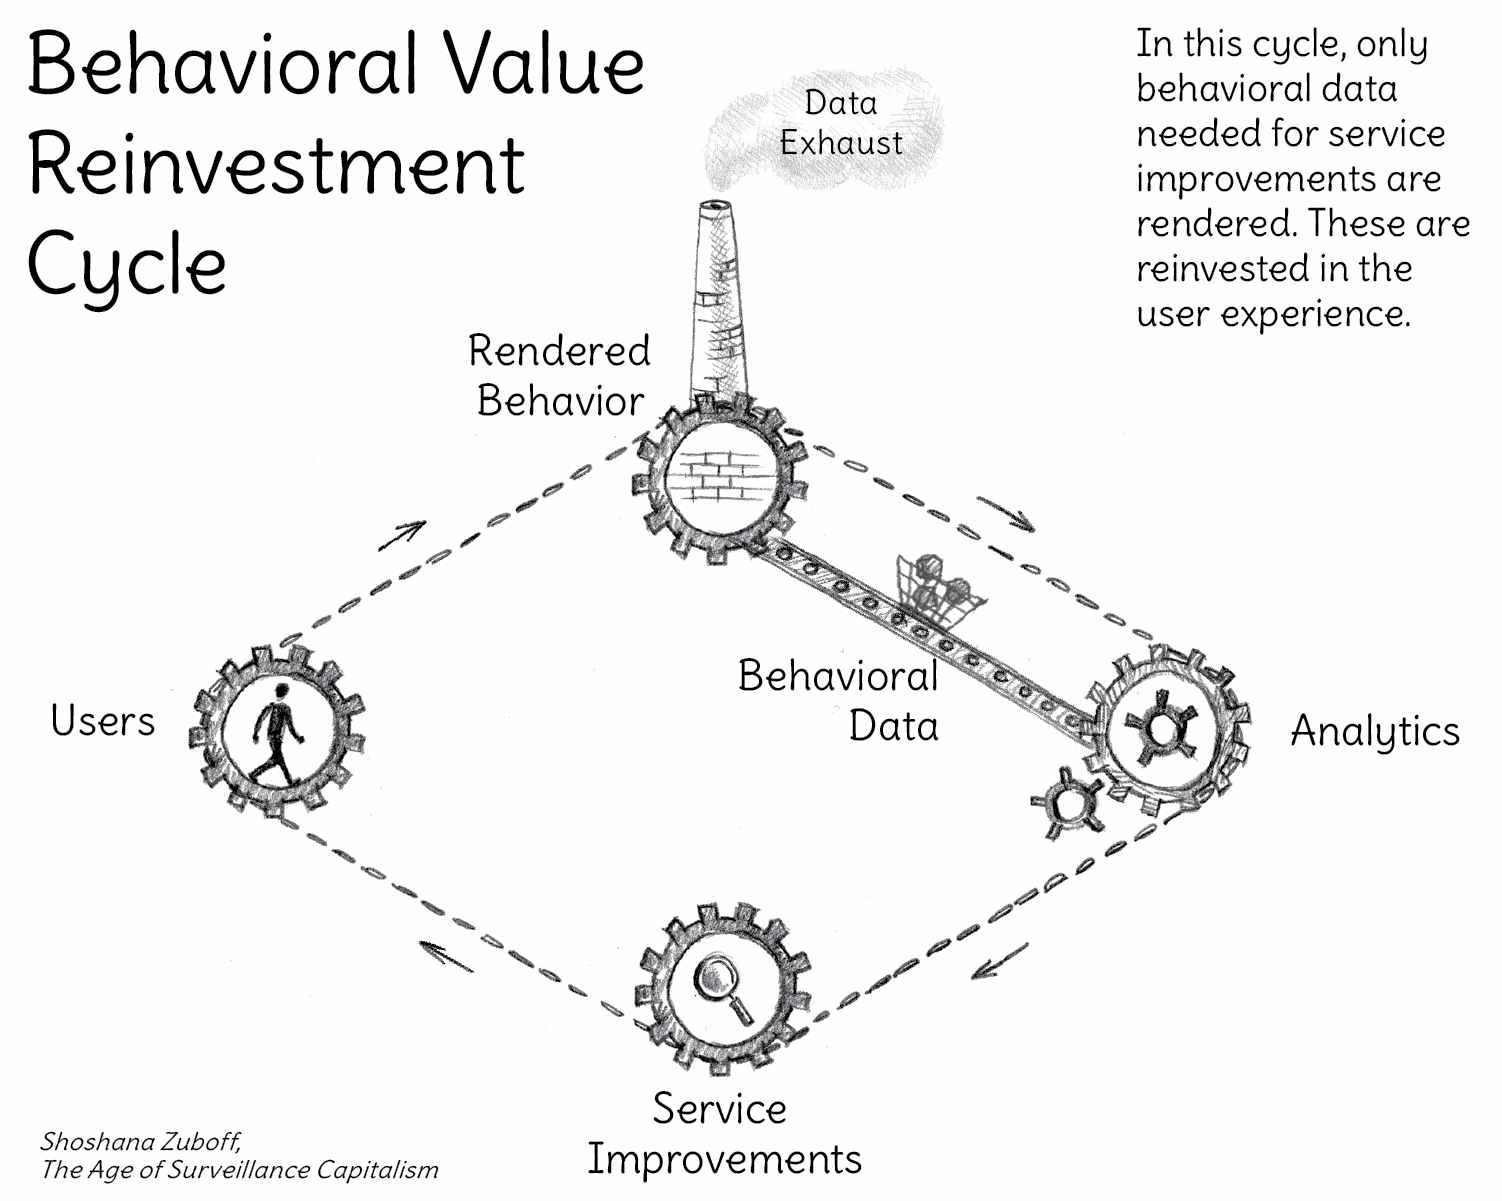 figure_1._the_behavioral_value_reinvestment_cycle.1551849249.jpg